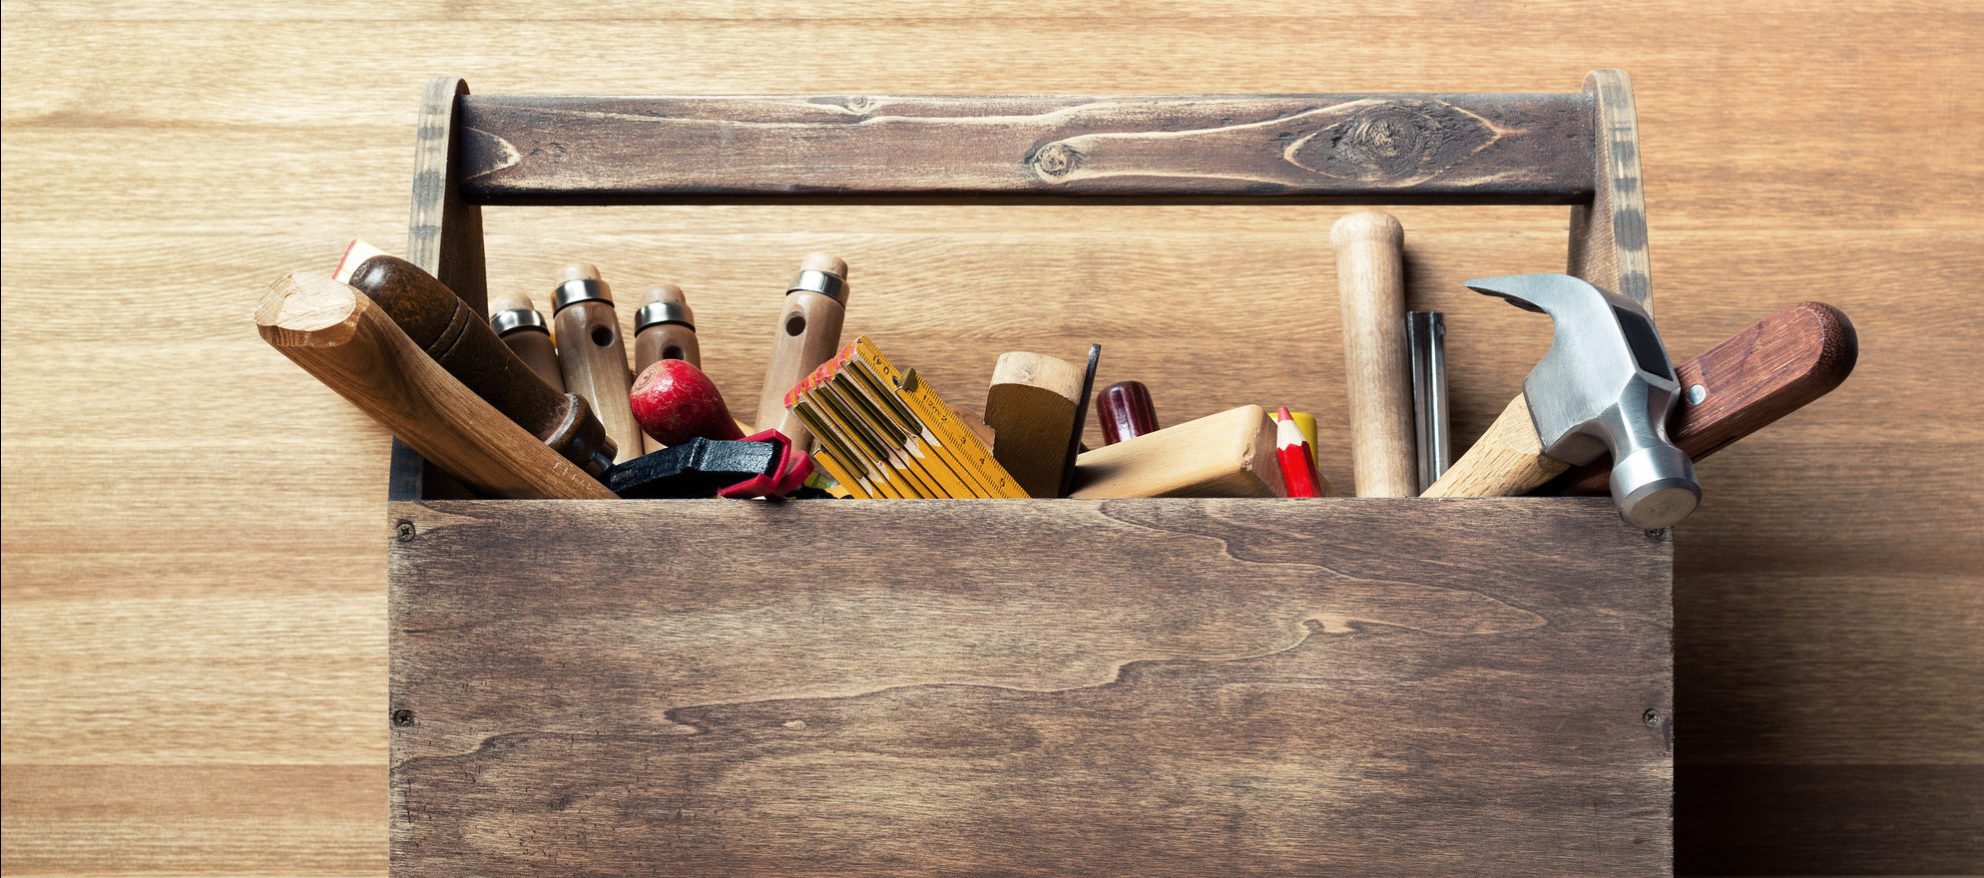 A toolbox for fixing things